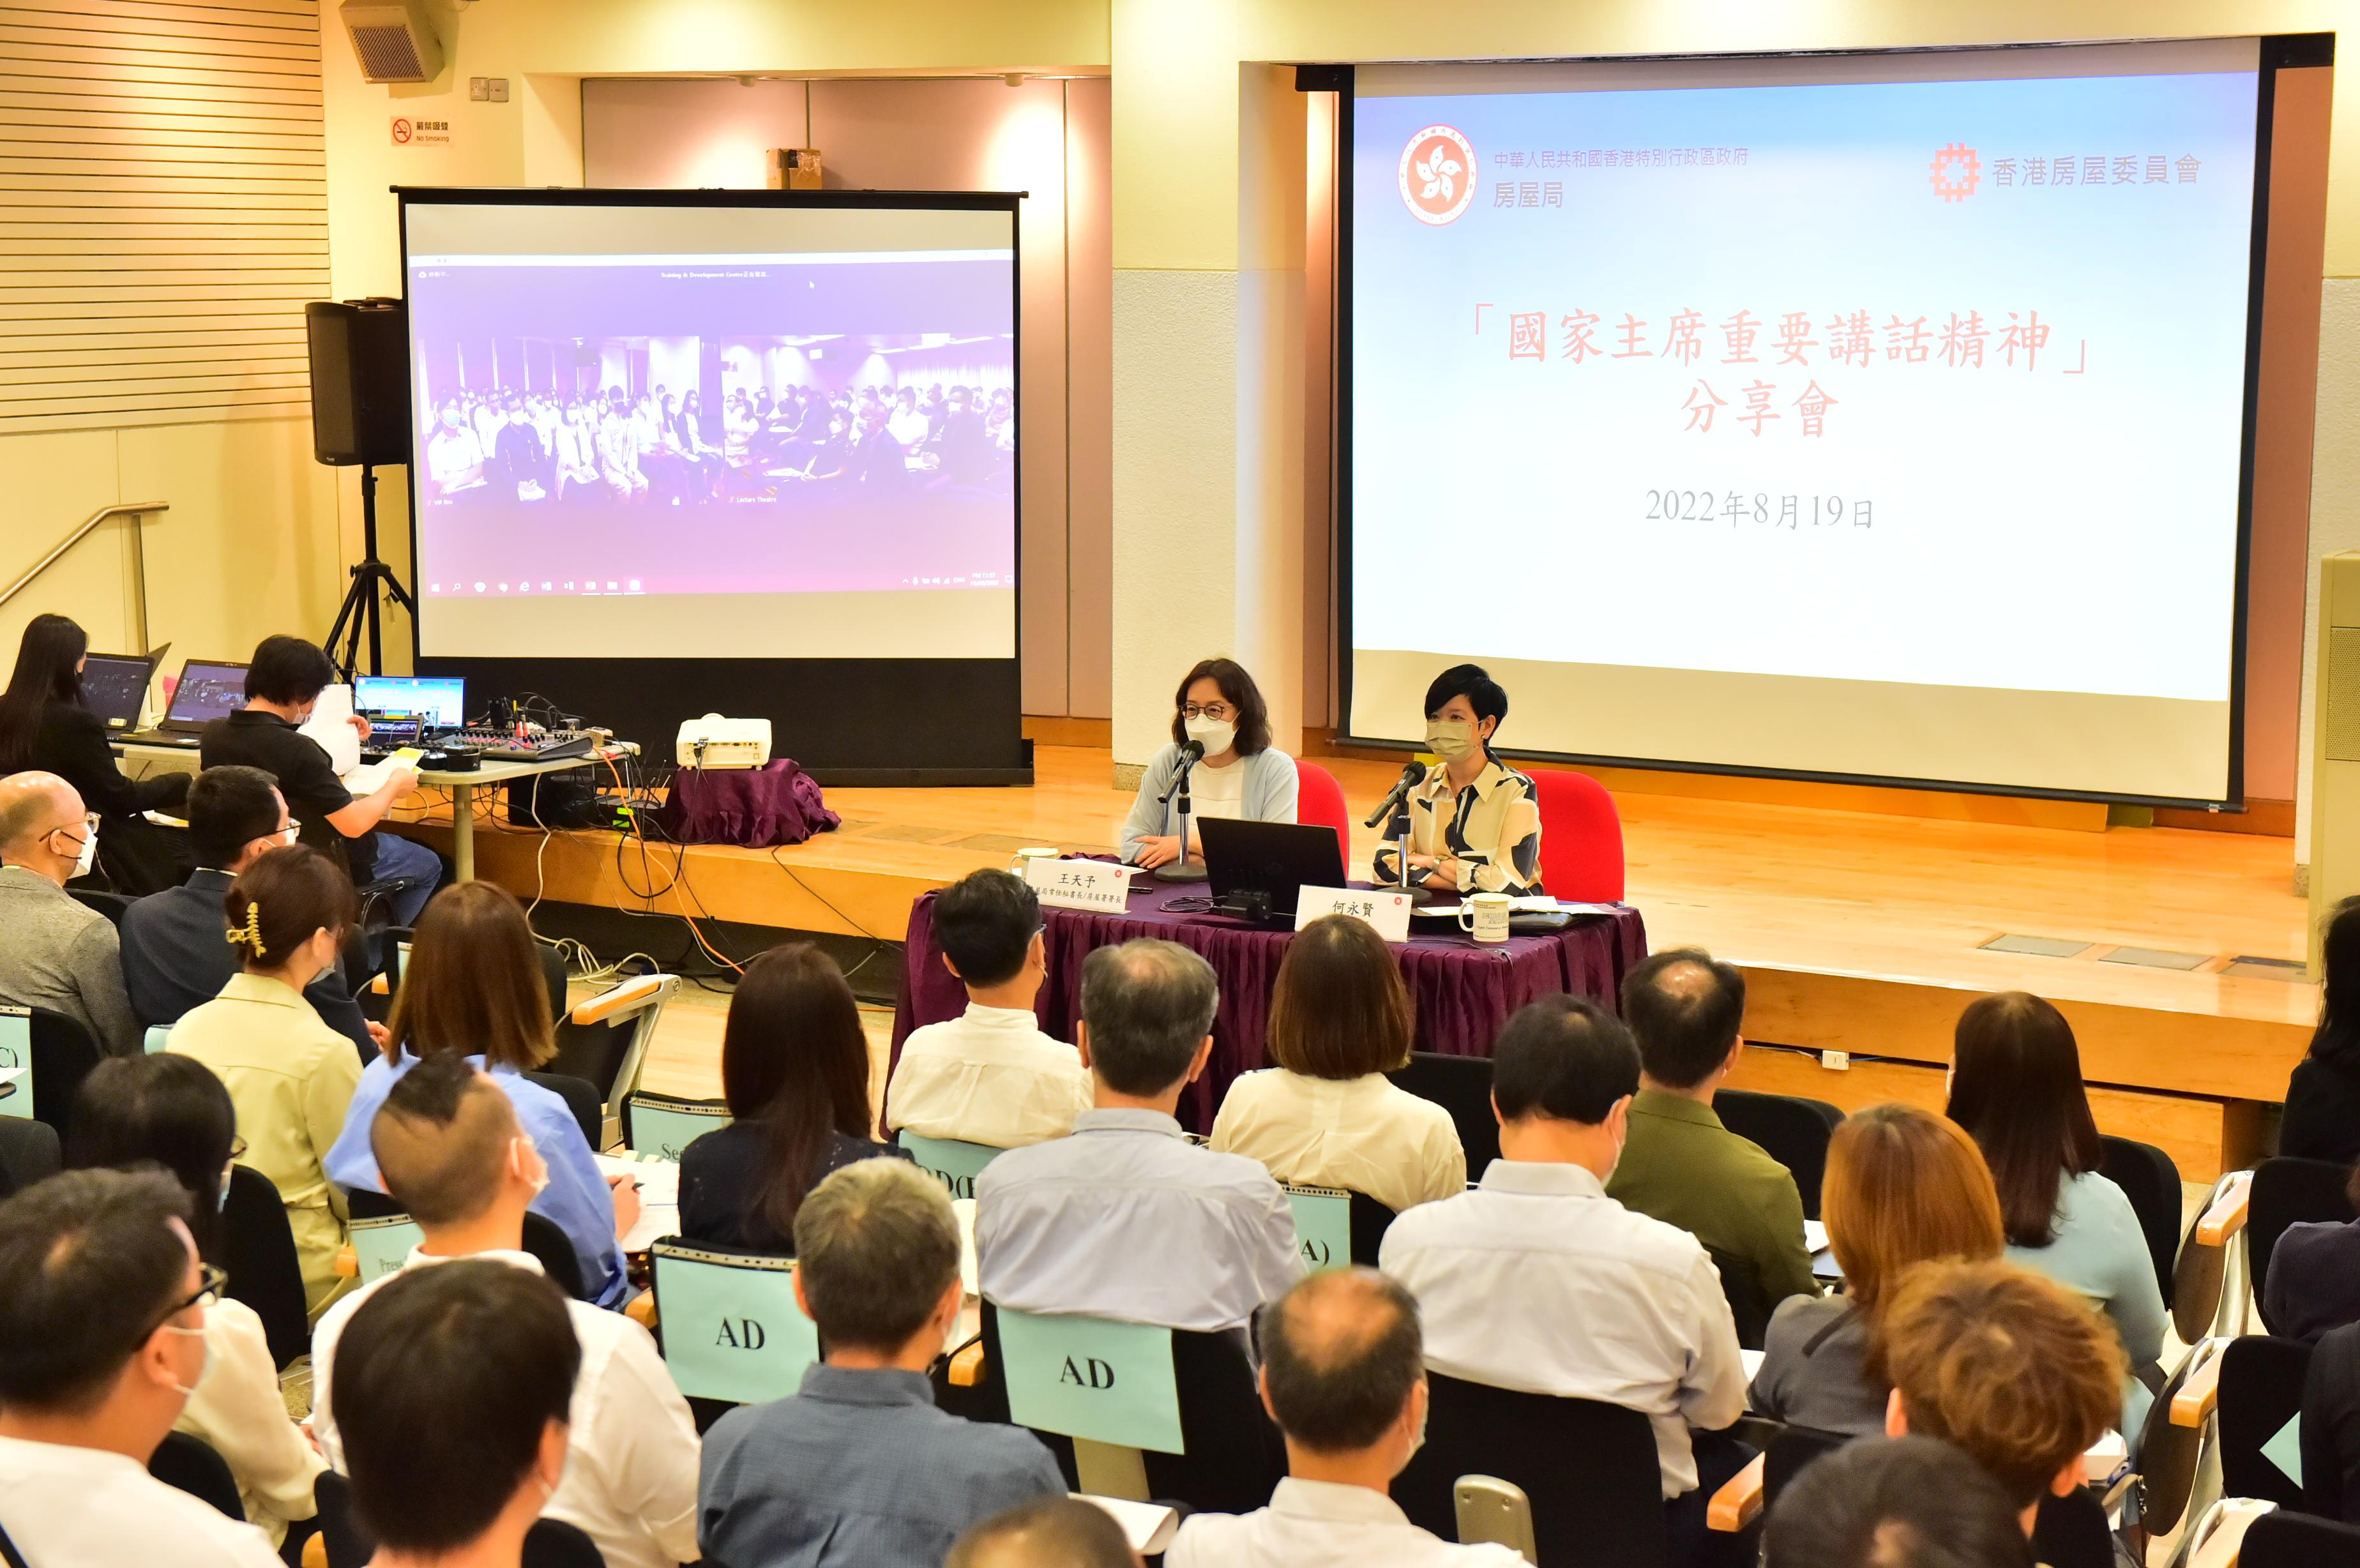 The Housing Bureau (HB) today (August 19) held a sharing session on "Spirit of the President's Important Speech" at the Hong Kong Housing Authority Headquarters, enabling colleagues to have a deeper understanding of the essence of the speech delivered by President Xi Jinping. Around 600 colleagues of the HB and the Housing Department attended the session or joined via online live broadcast.